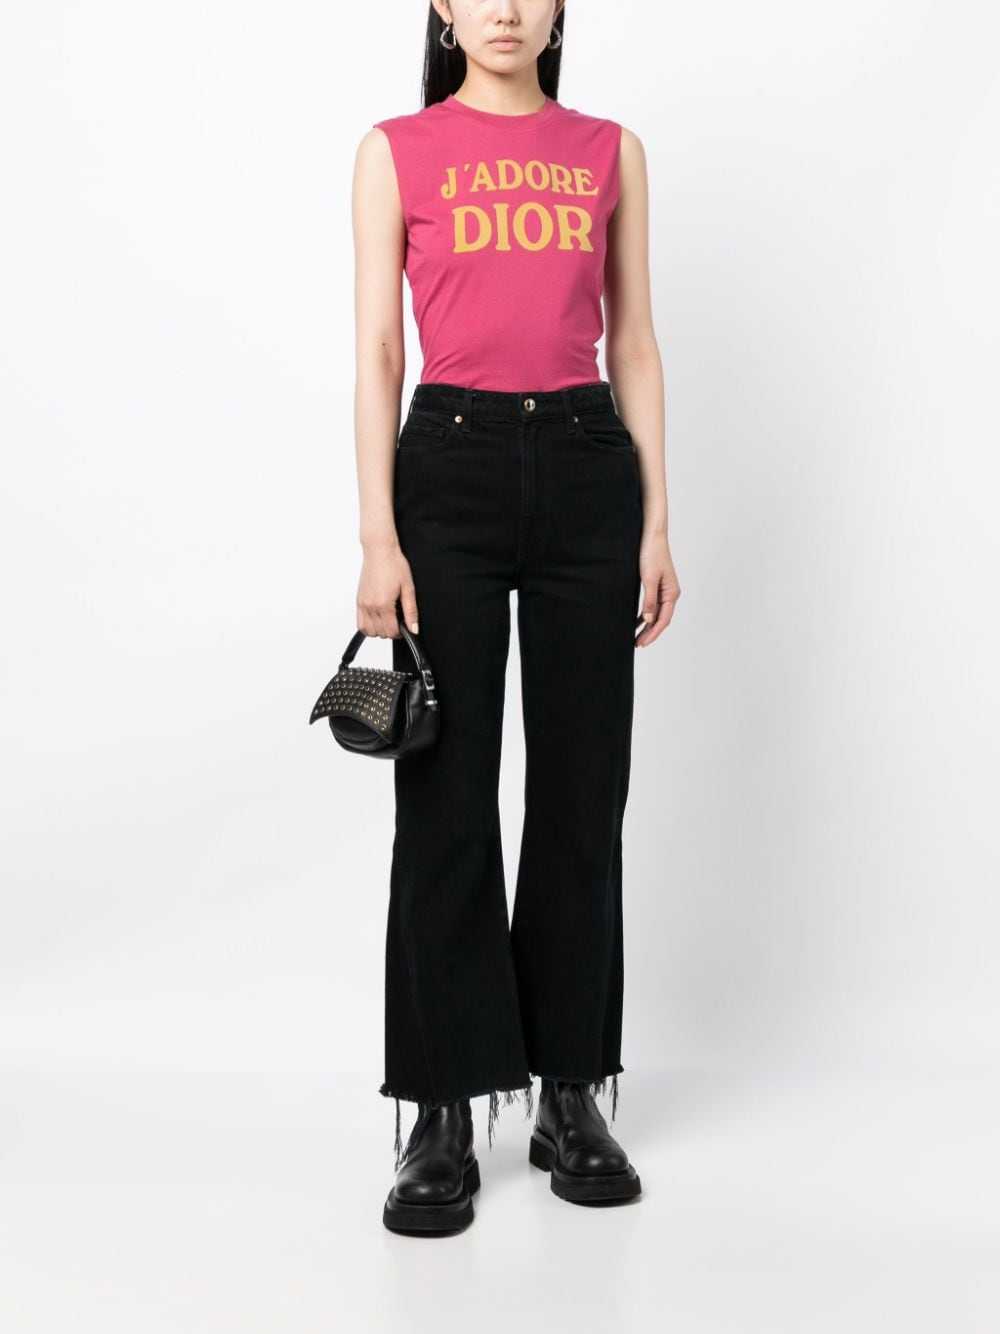 Christian Dior Pre-Owned 2002 J'Adore Dior tank t… - image 2